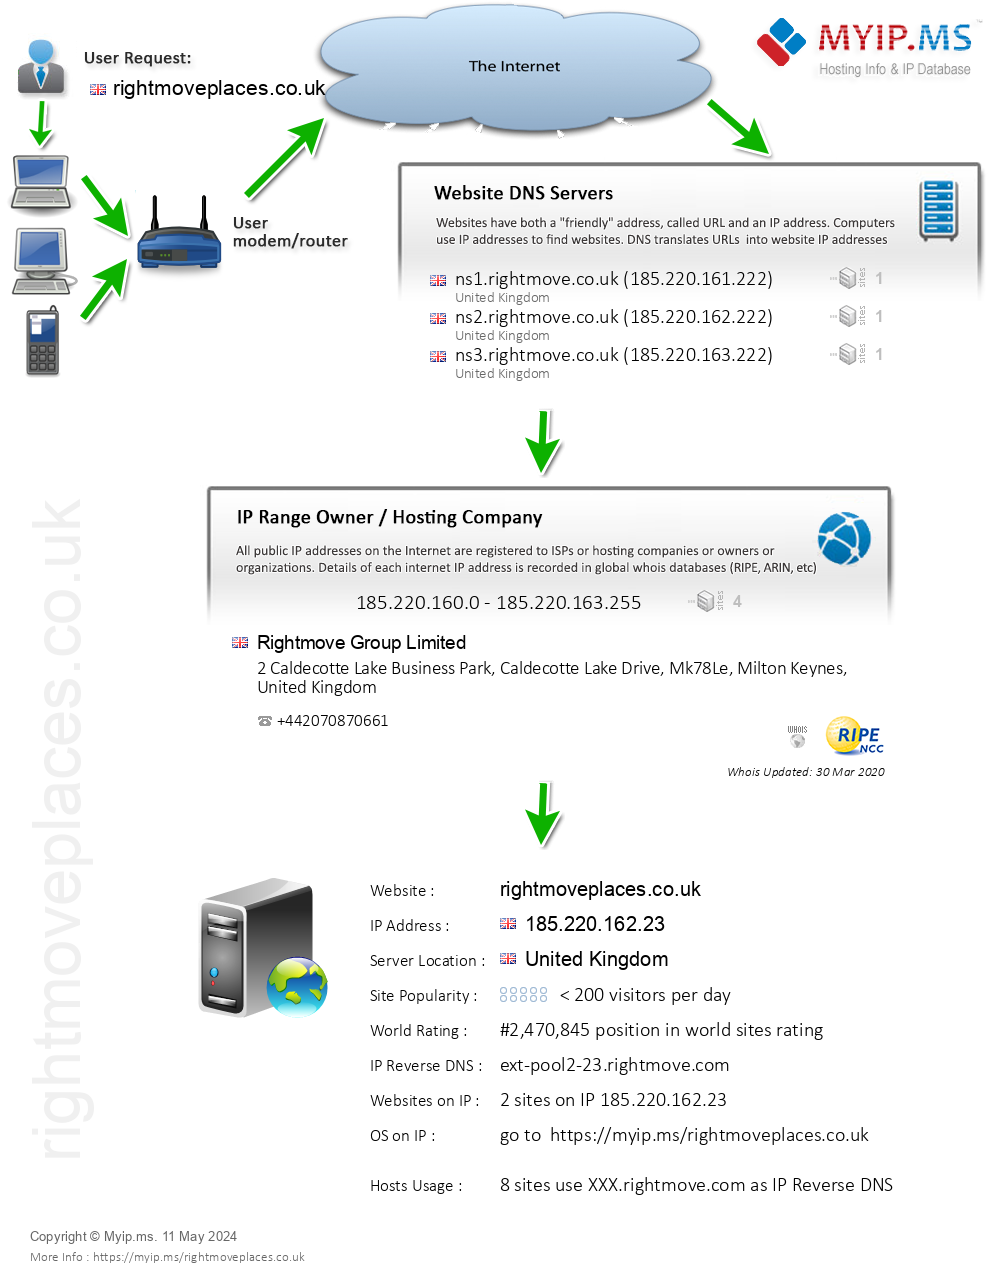 Rightmoveplaces.co.uk - Website Hosting Visual IP Diagram